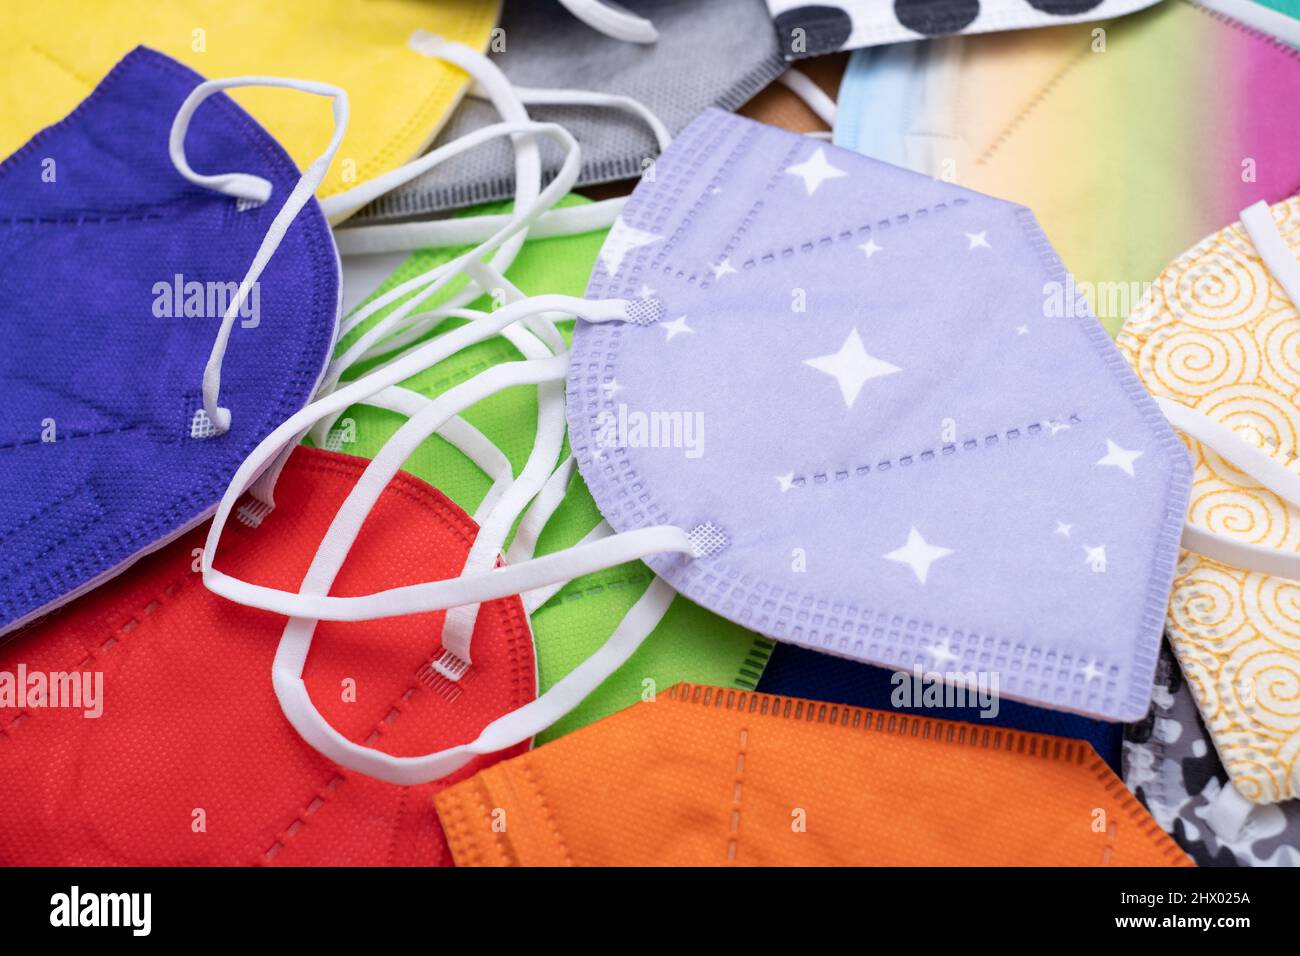 Heap of; different various colors face masks respirators. Top view flat layer. Protection from covid virus during pandemic. Stock Photo